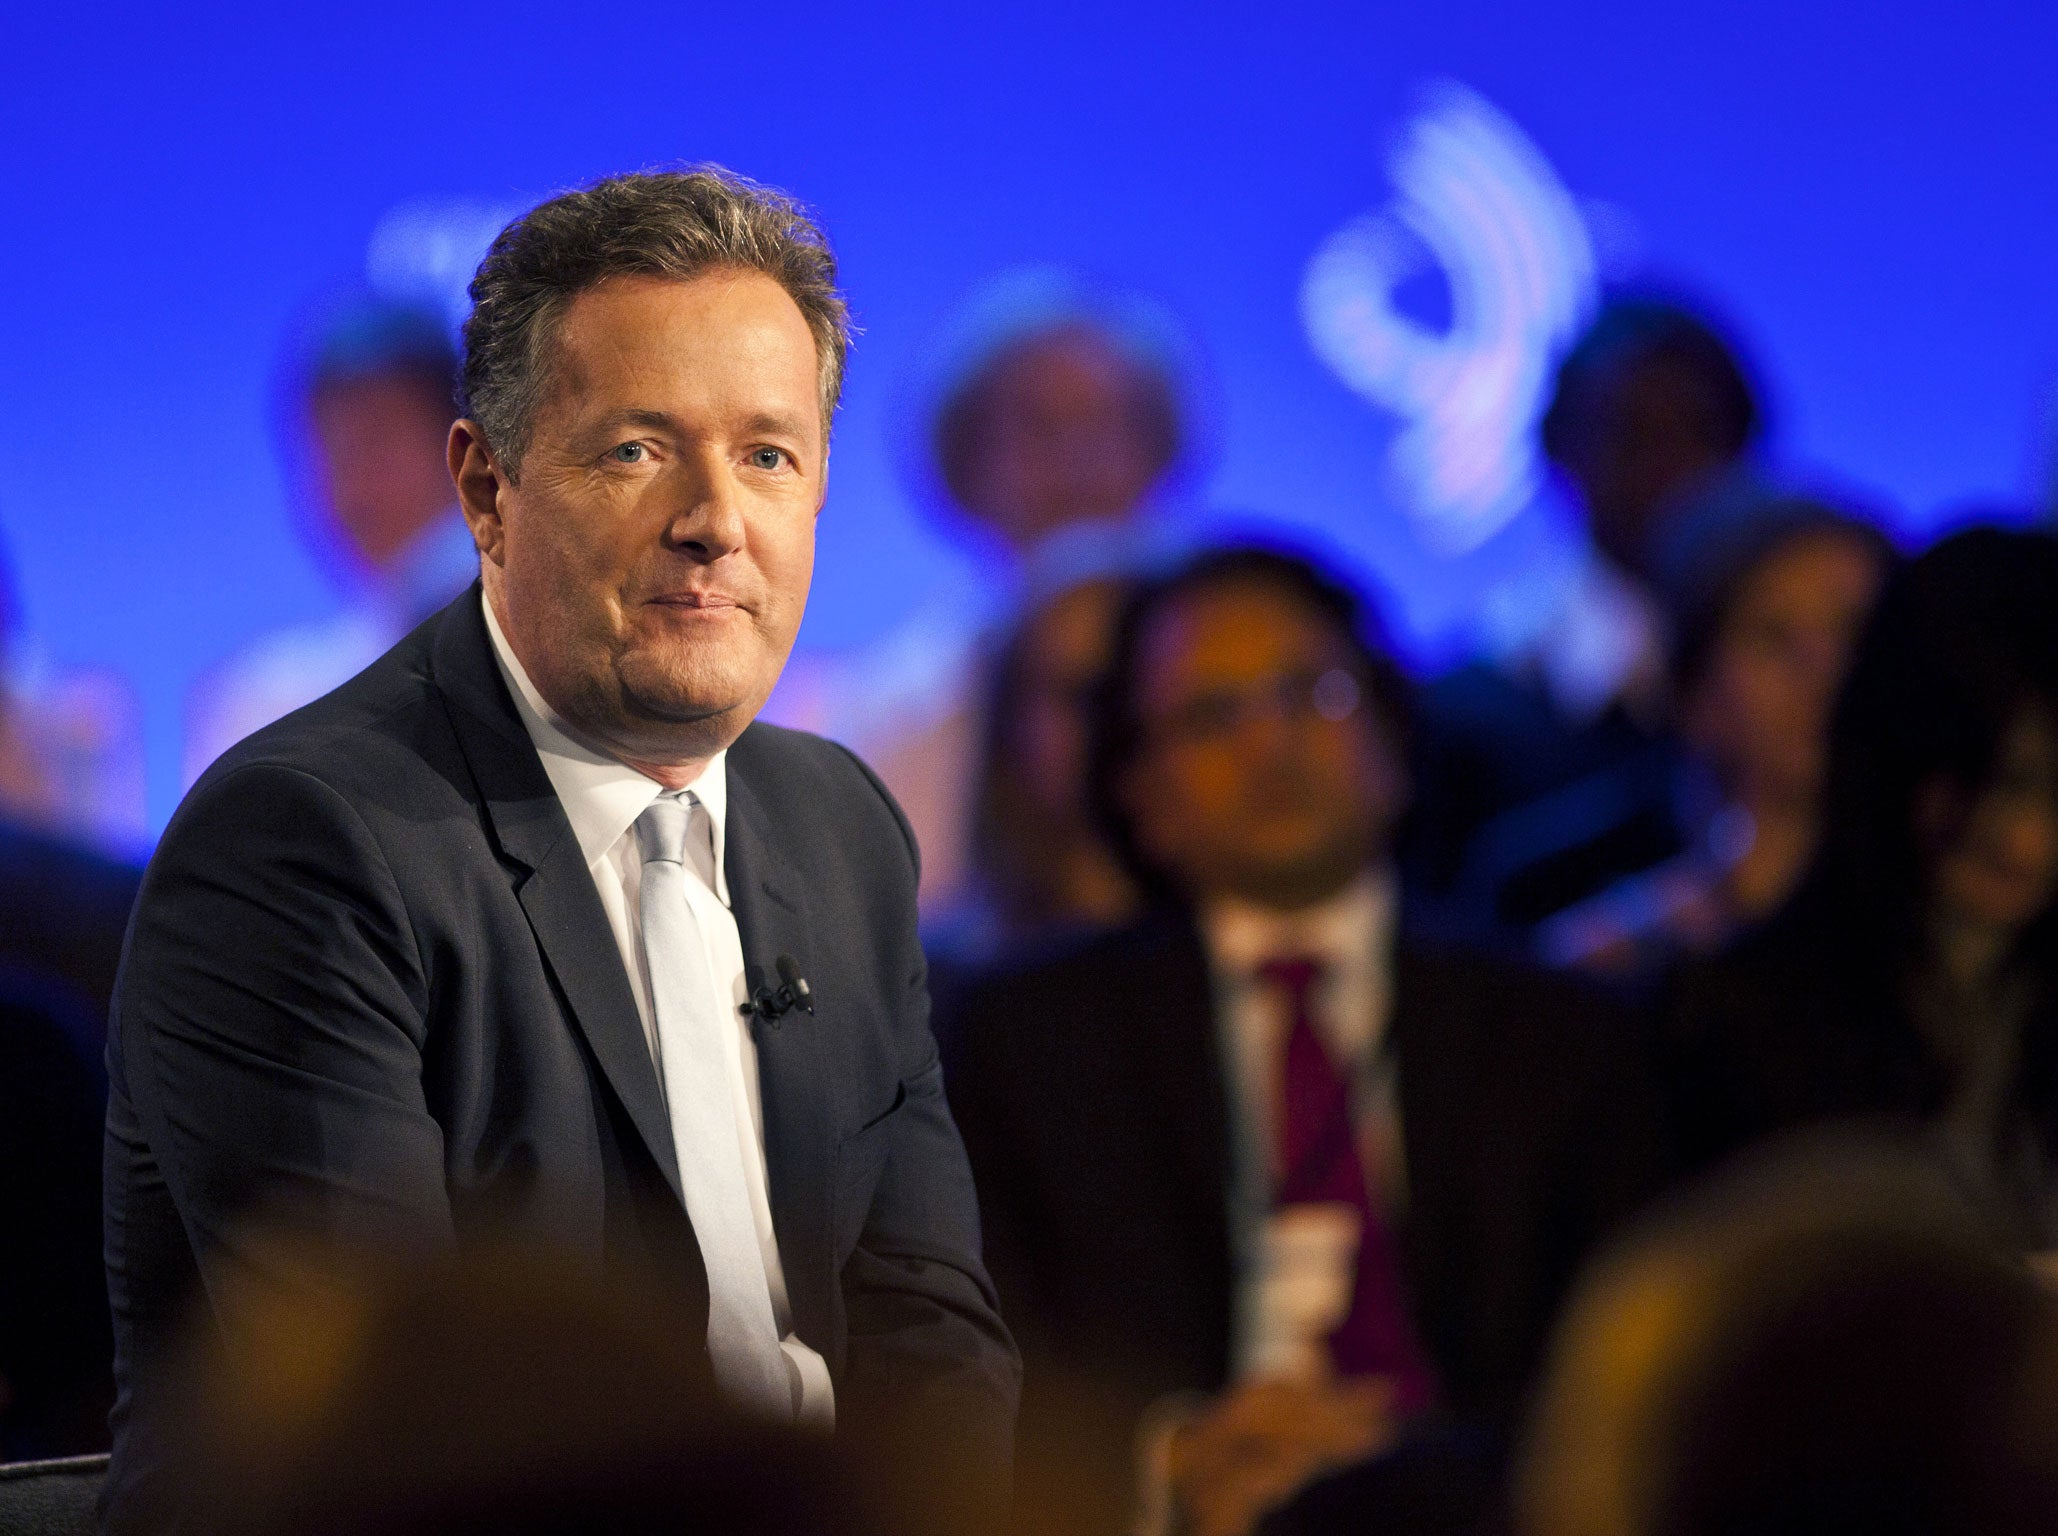 Piers Morgan has angered Twitter users